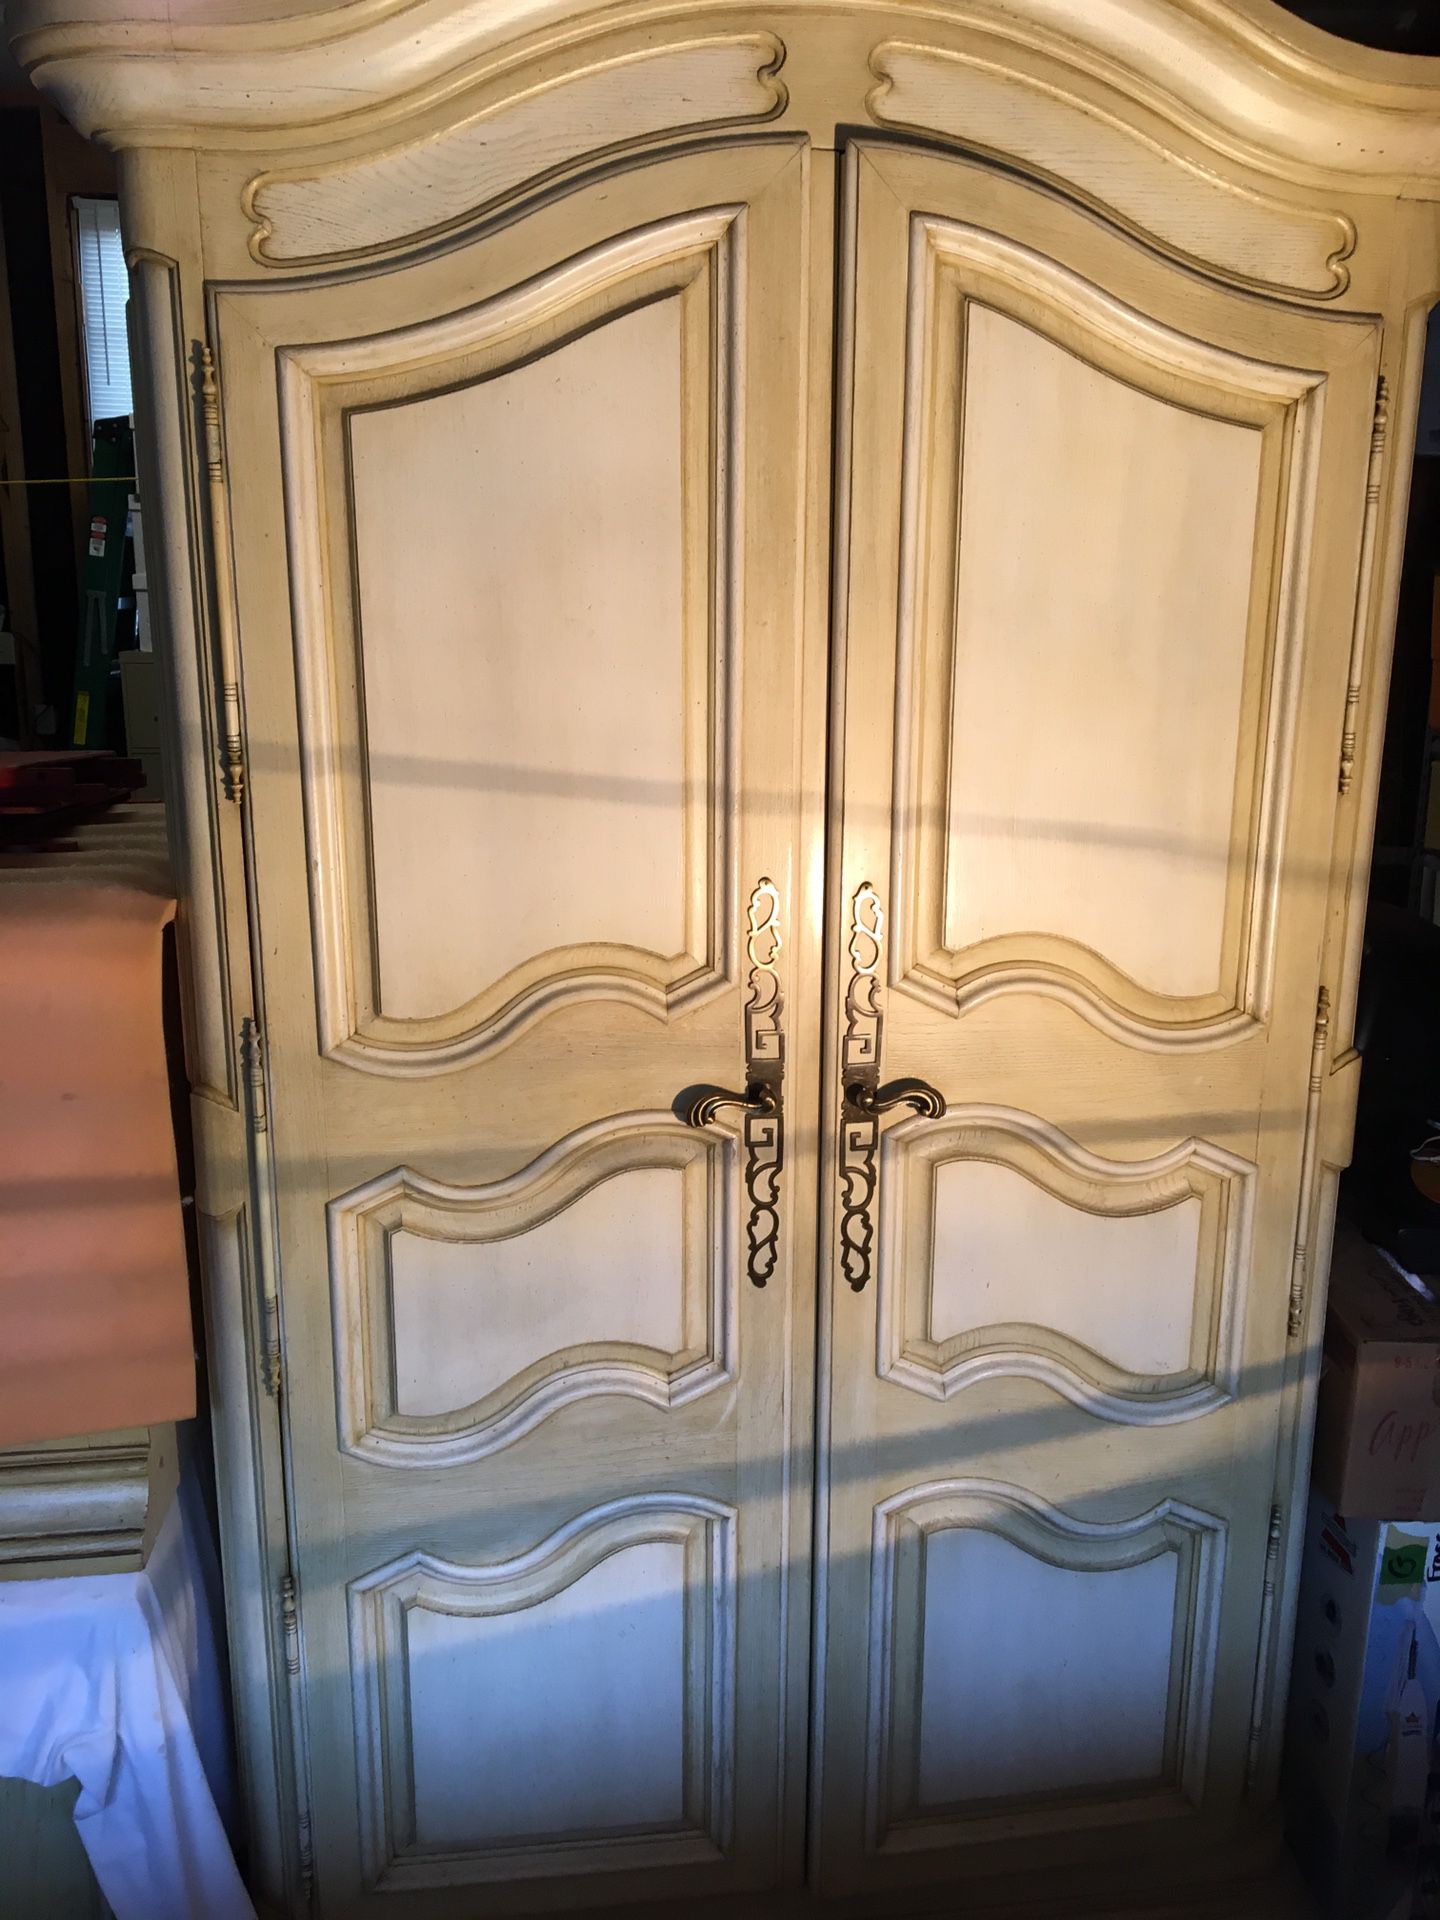 MUST GO! French Furniture - 5 Piece. ORIGINAL $10,000; NOW $1000!